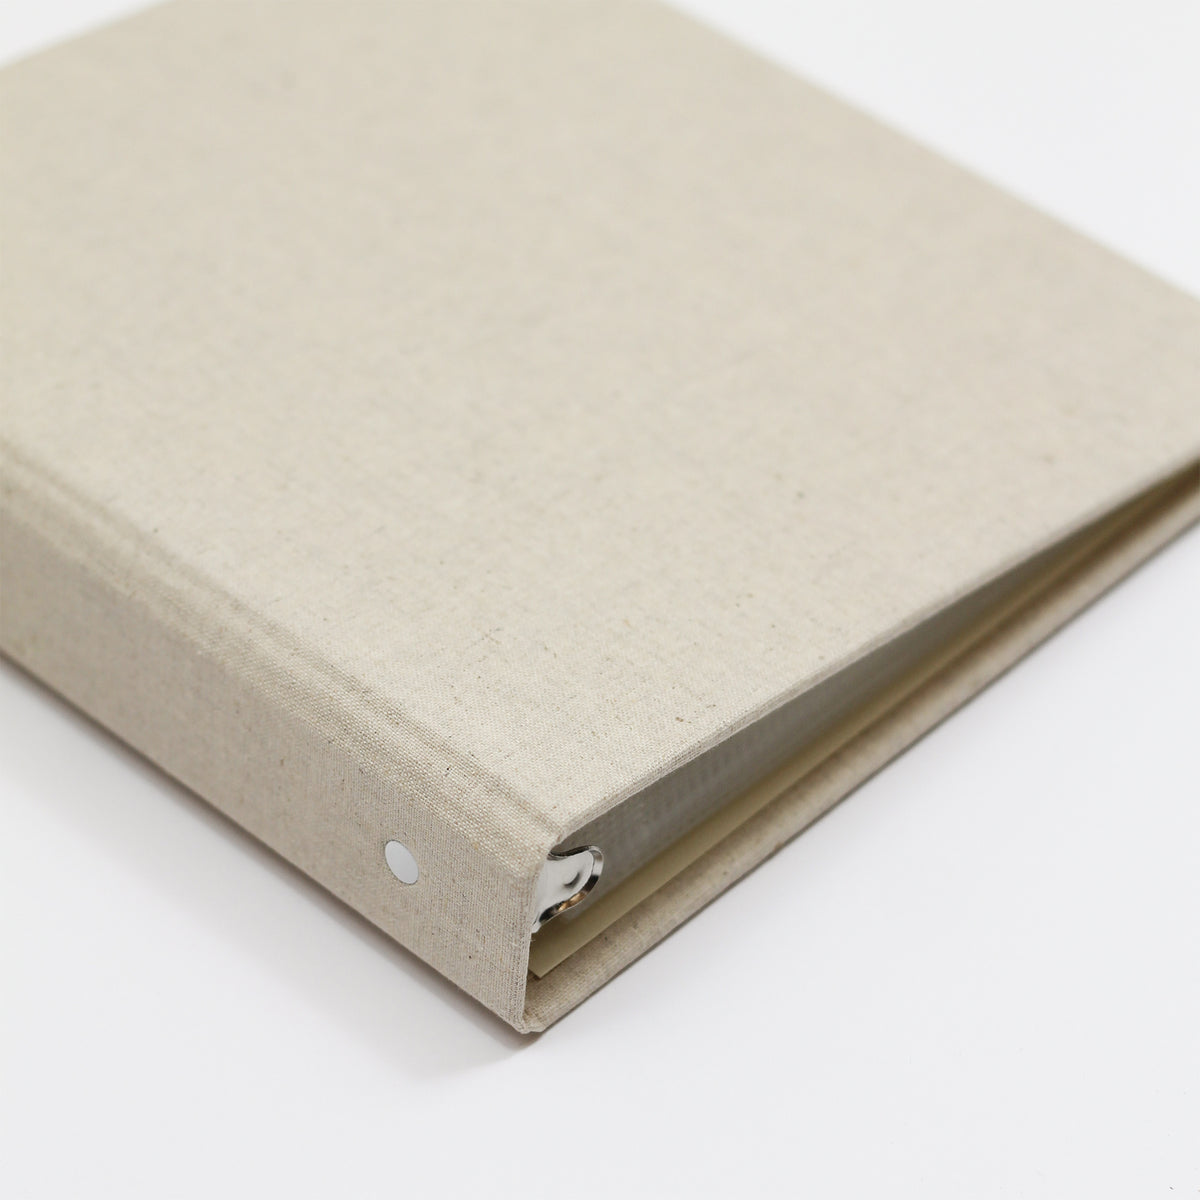 Photo Binder for 5x7 photos | Cover: Natural Linen | Available Personalized